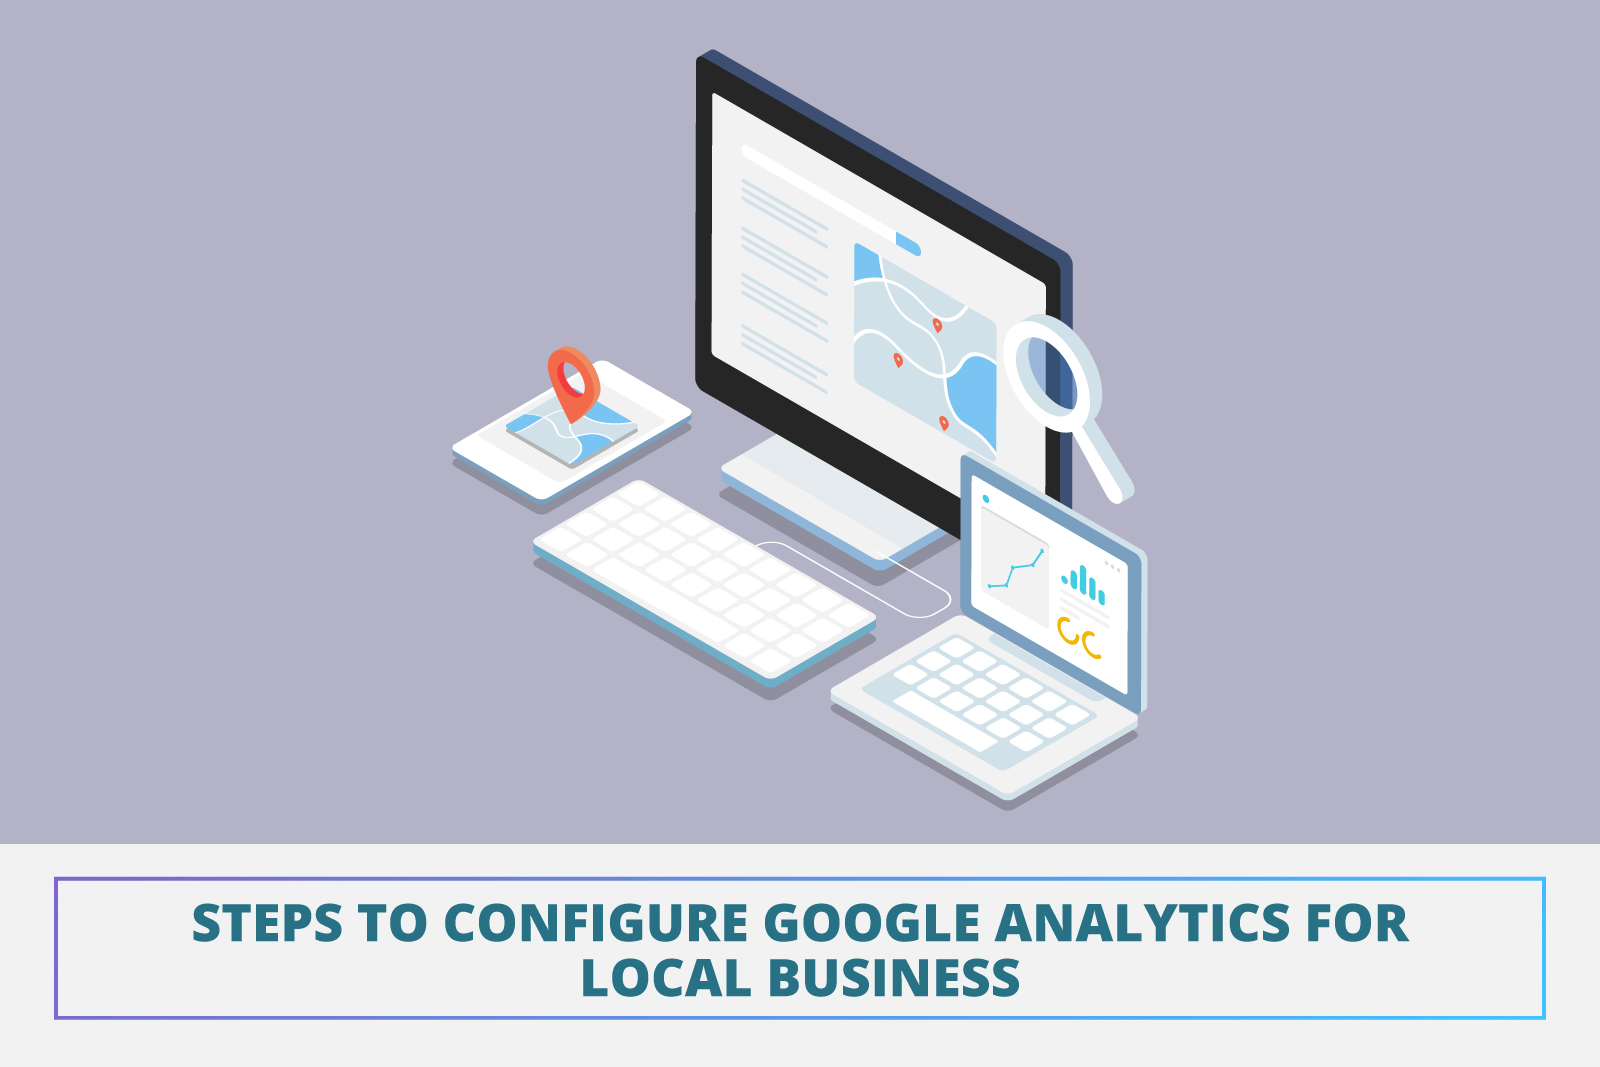 Steps to configure Google Analytics for local business